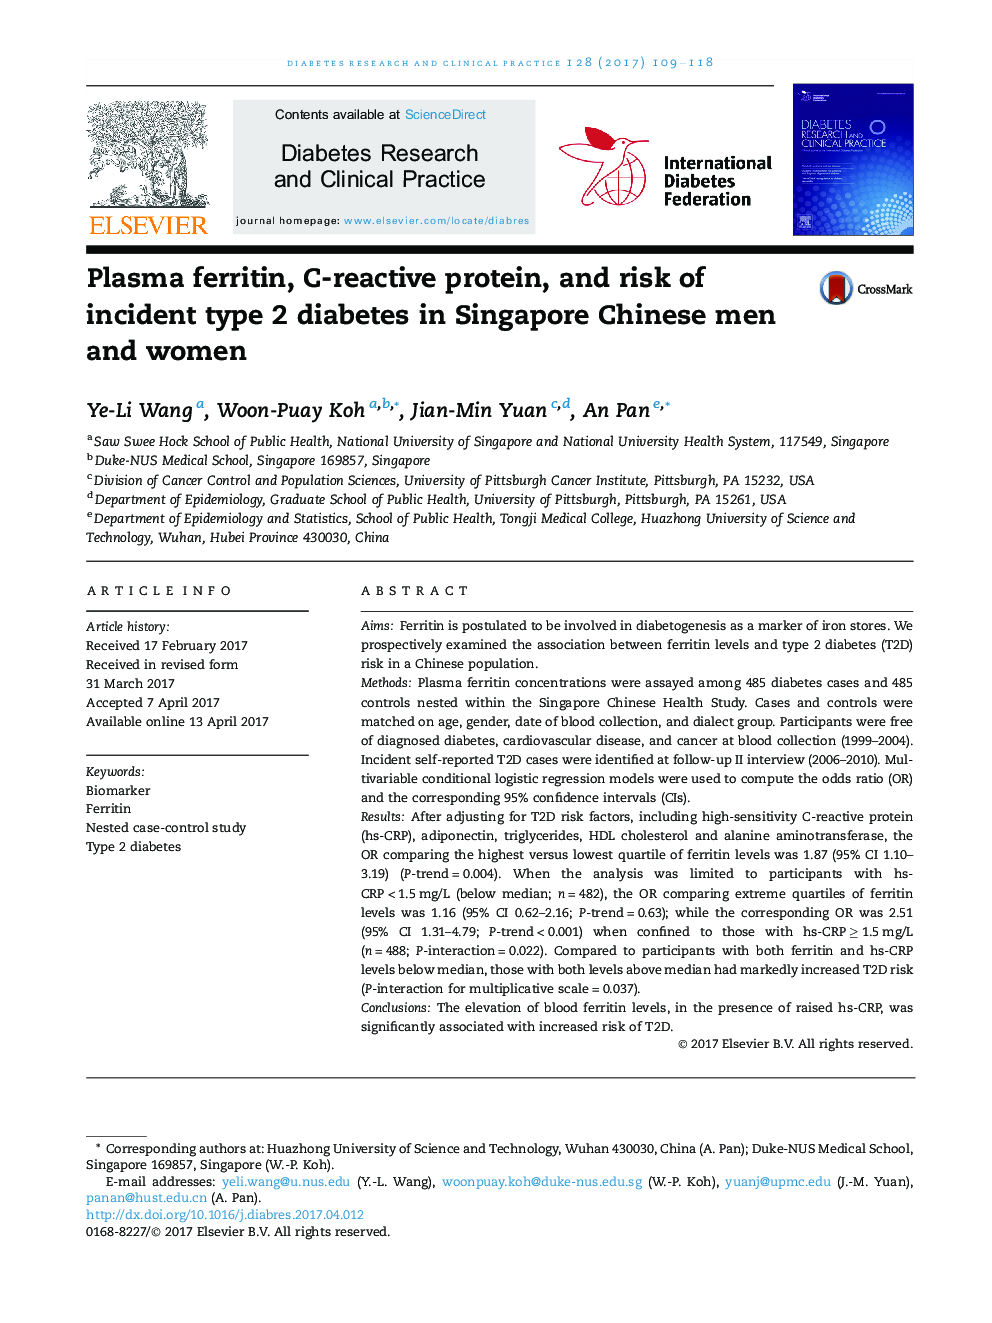 Plasma ferritin, C-reactive protein, and risk of incident type 2 diabetes in Singapore Chinese men and women